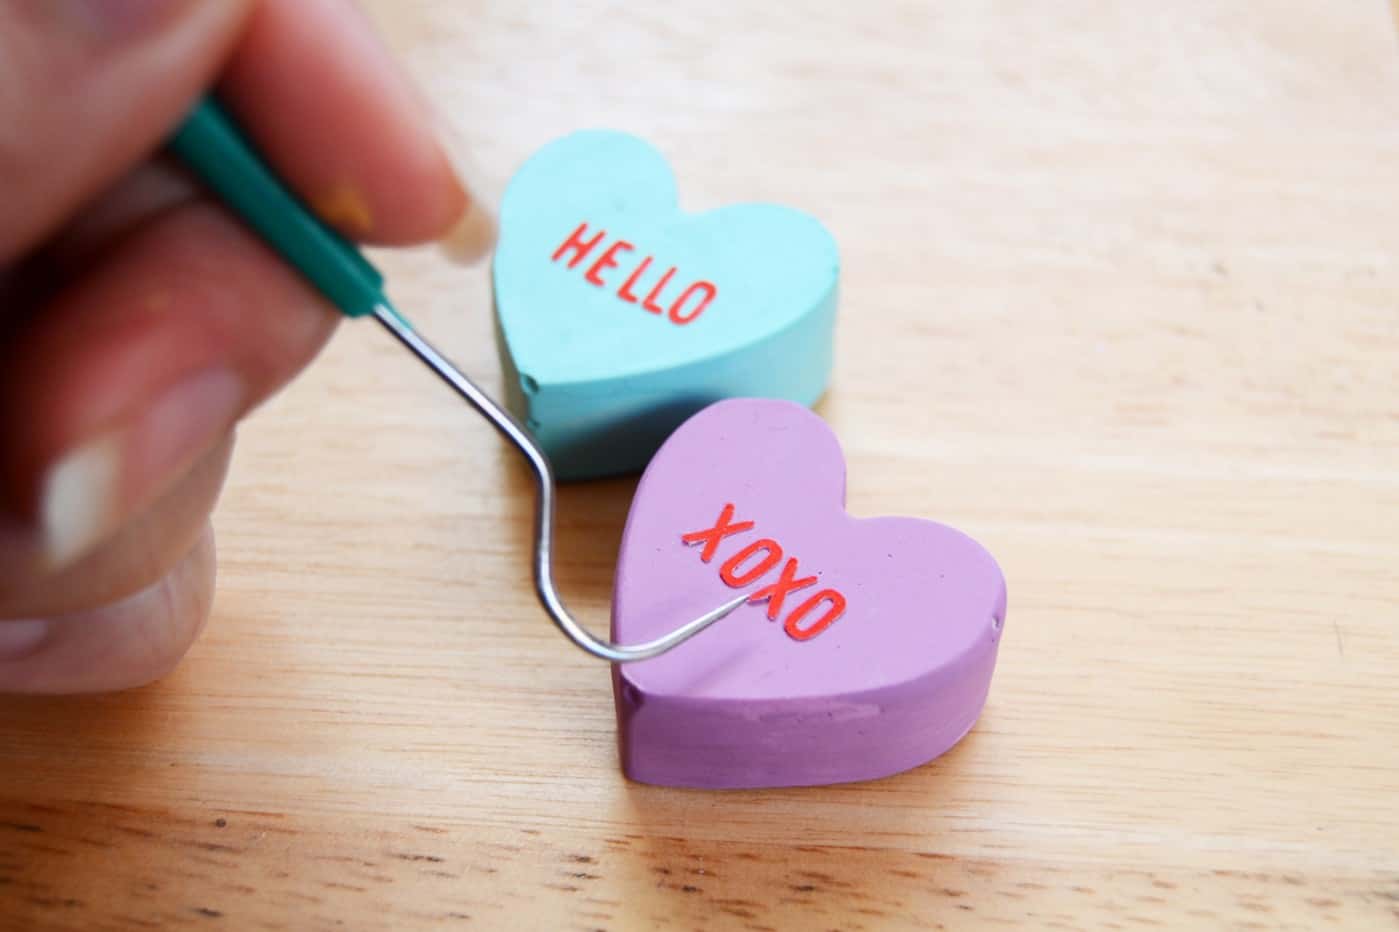 Adhering letters to the hearts and using a small tool to place them